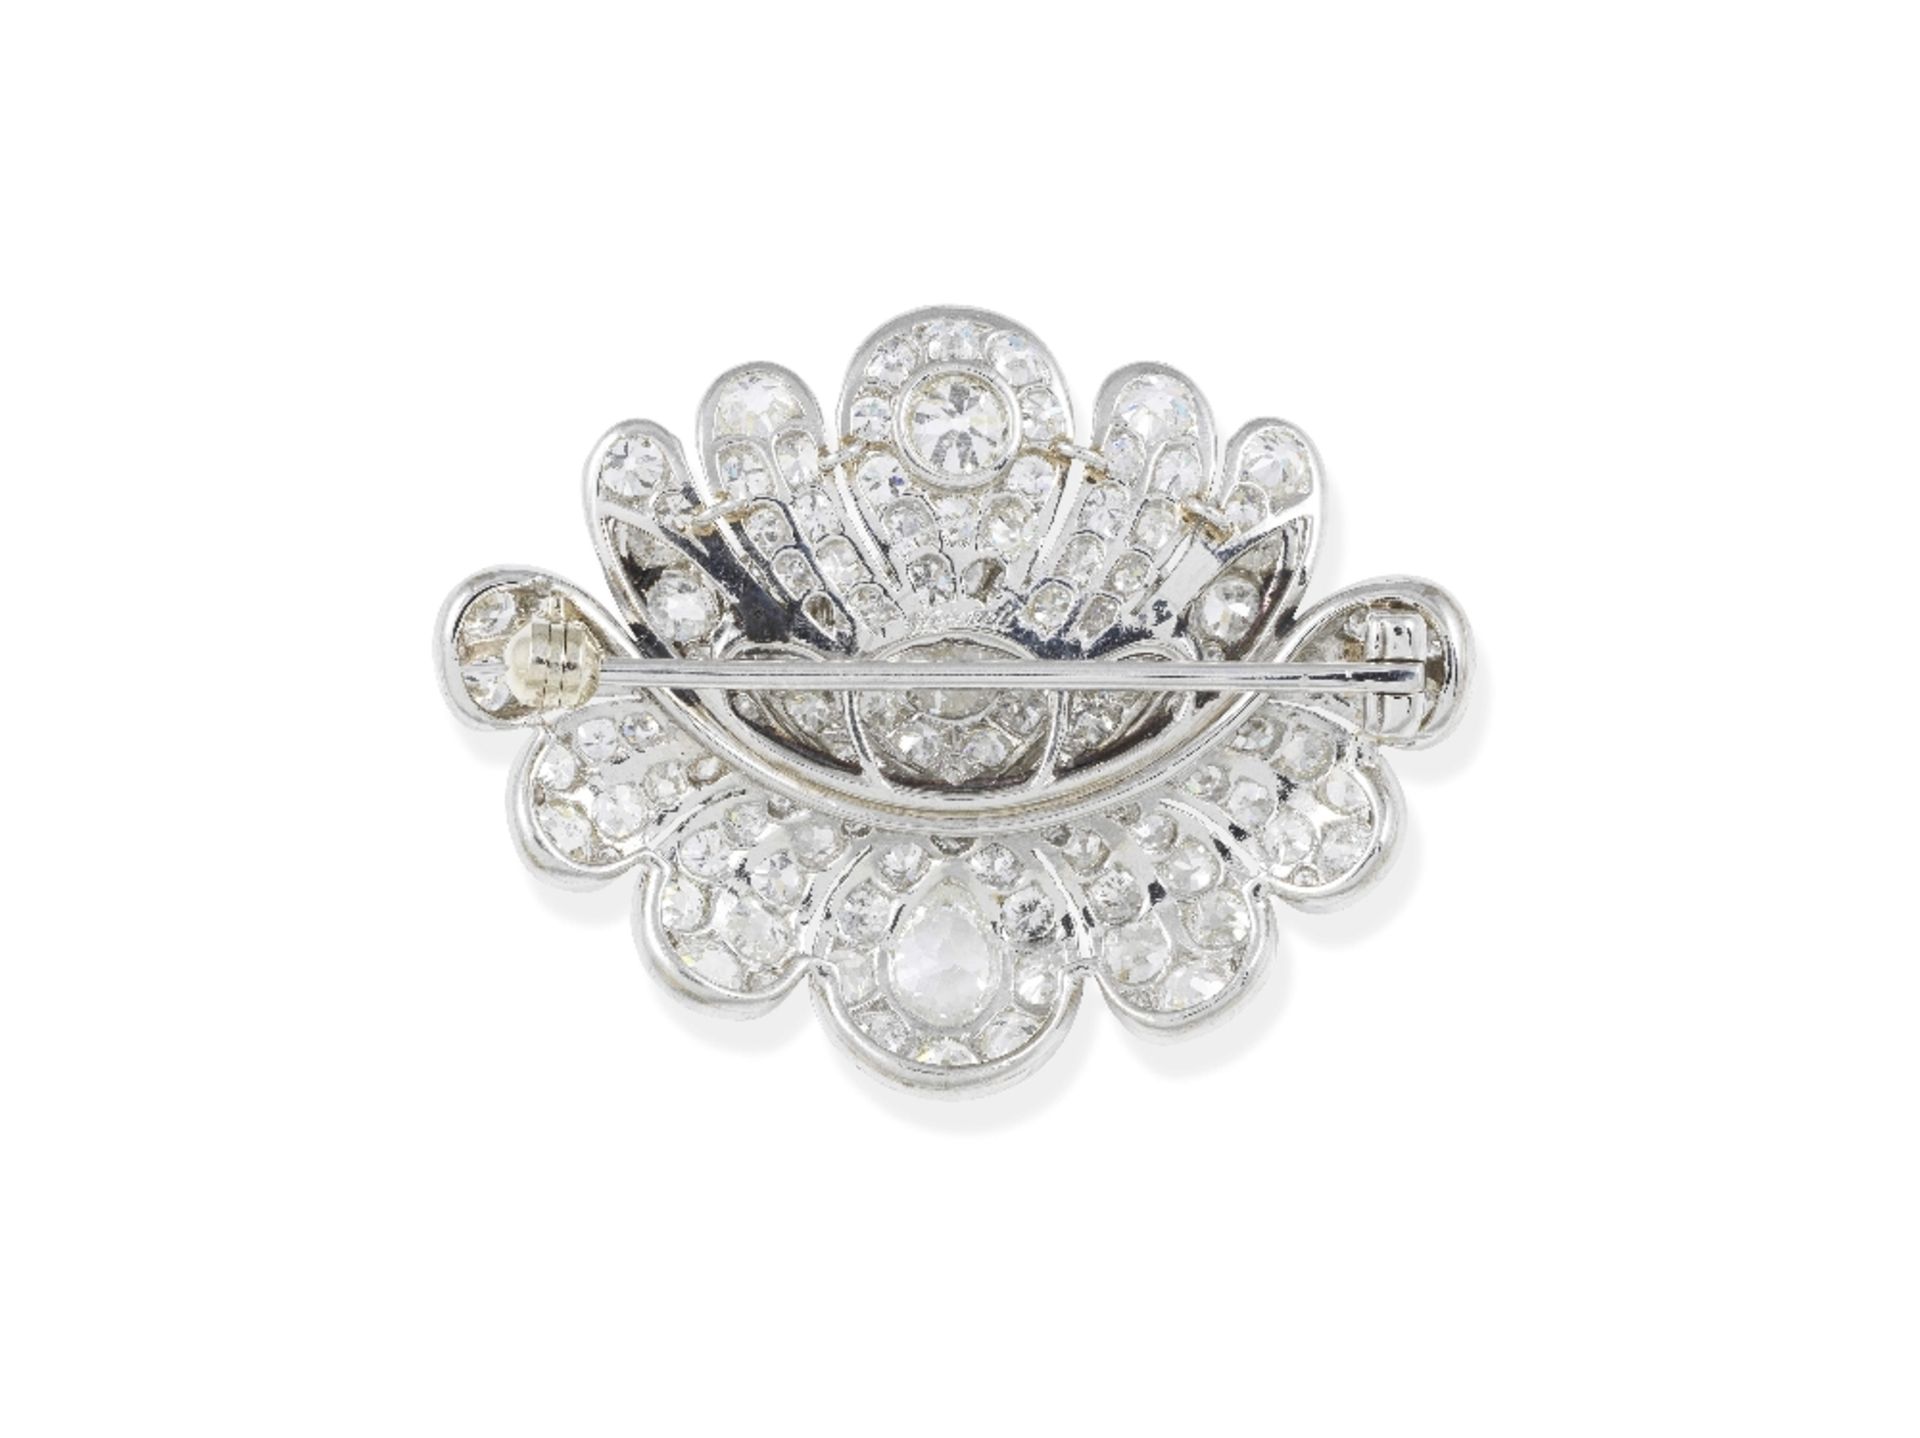 HENNELL: BROCHE DIAMANTS, VERS 1930 - Image 2 of 3